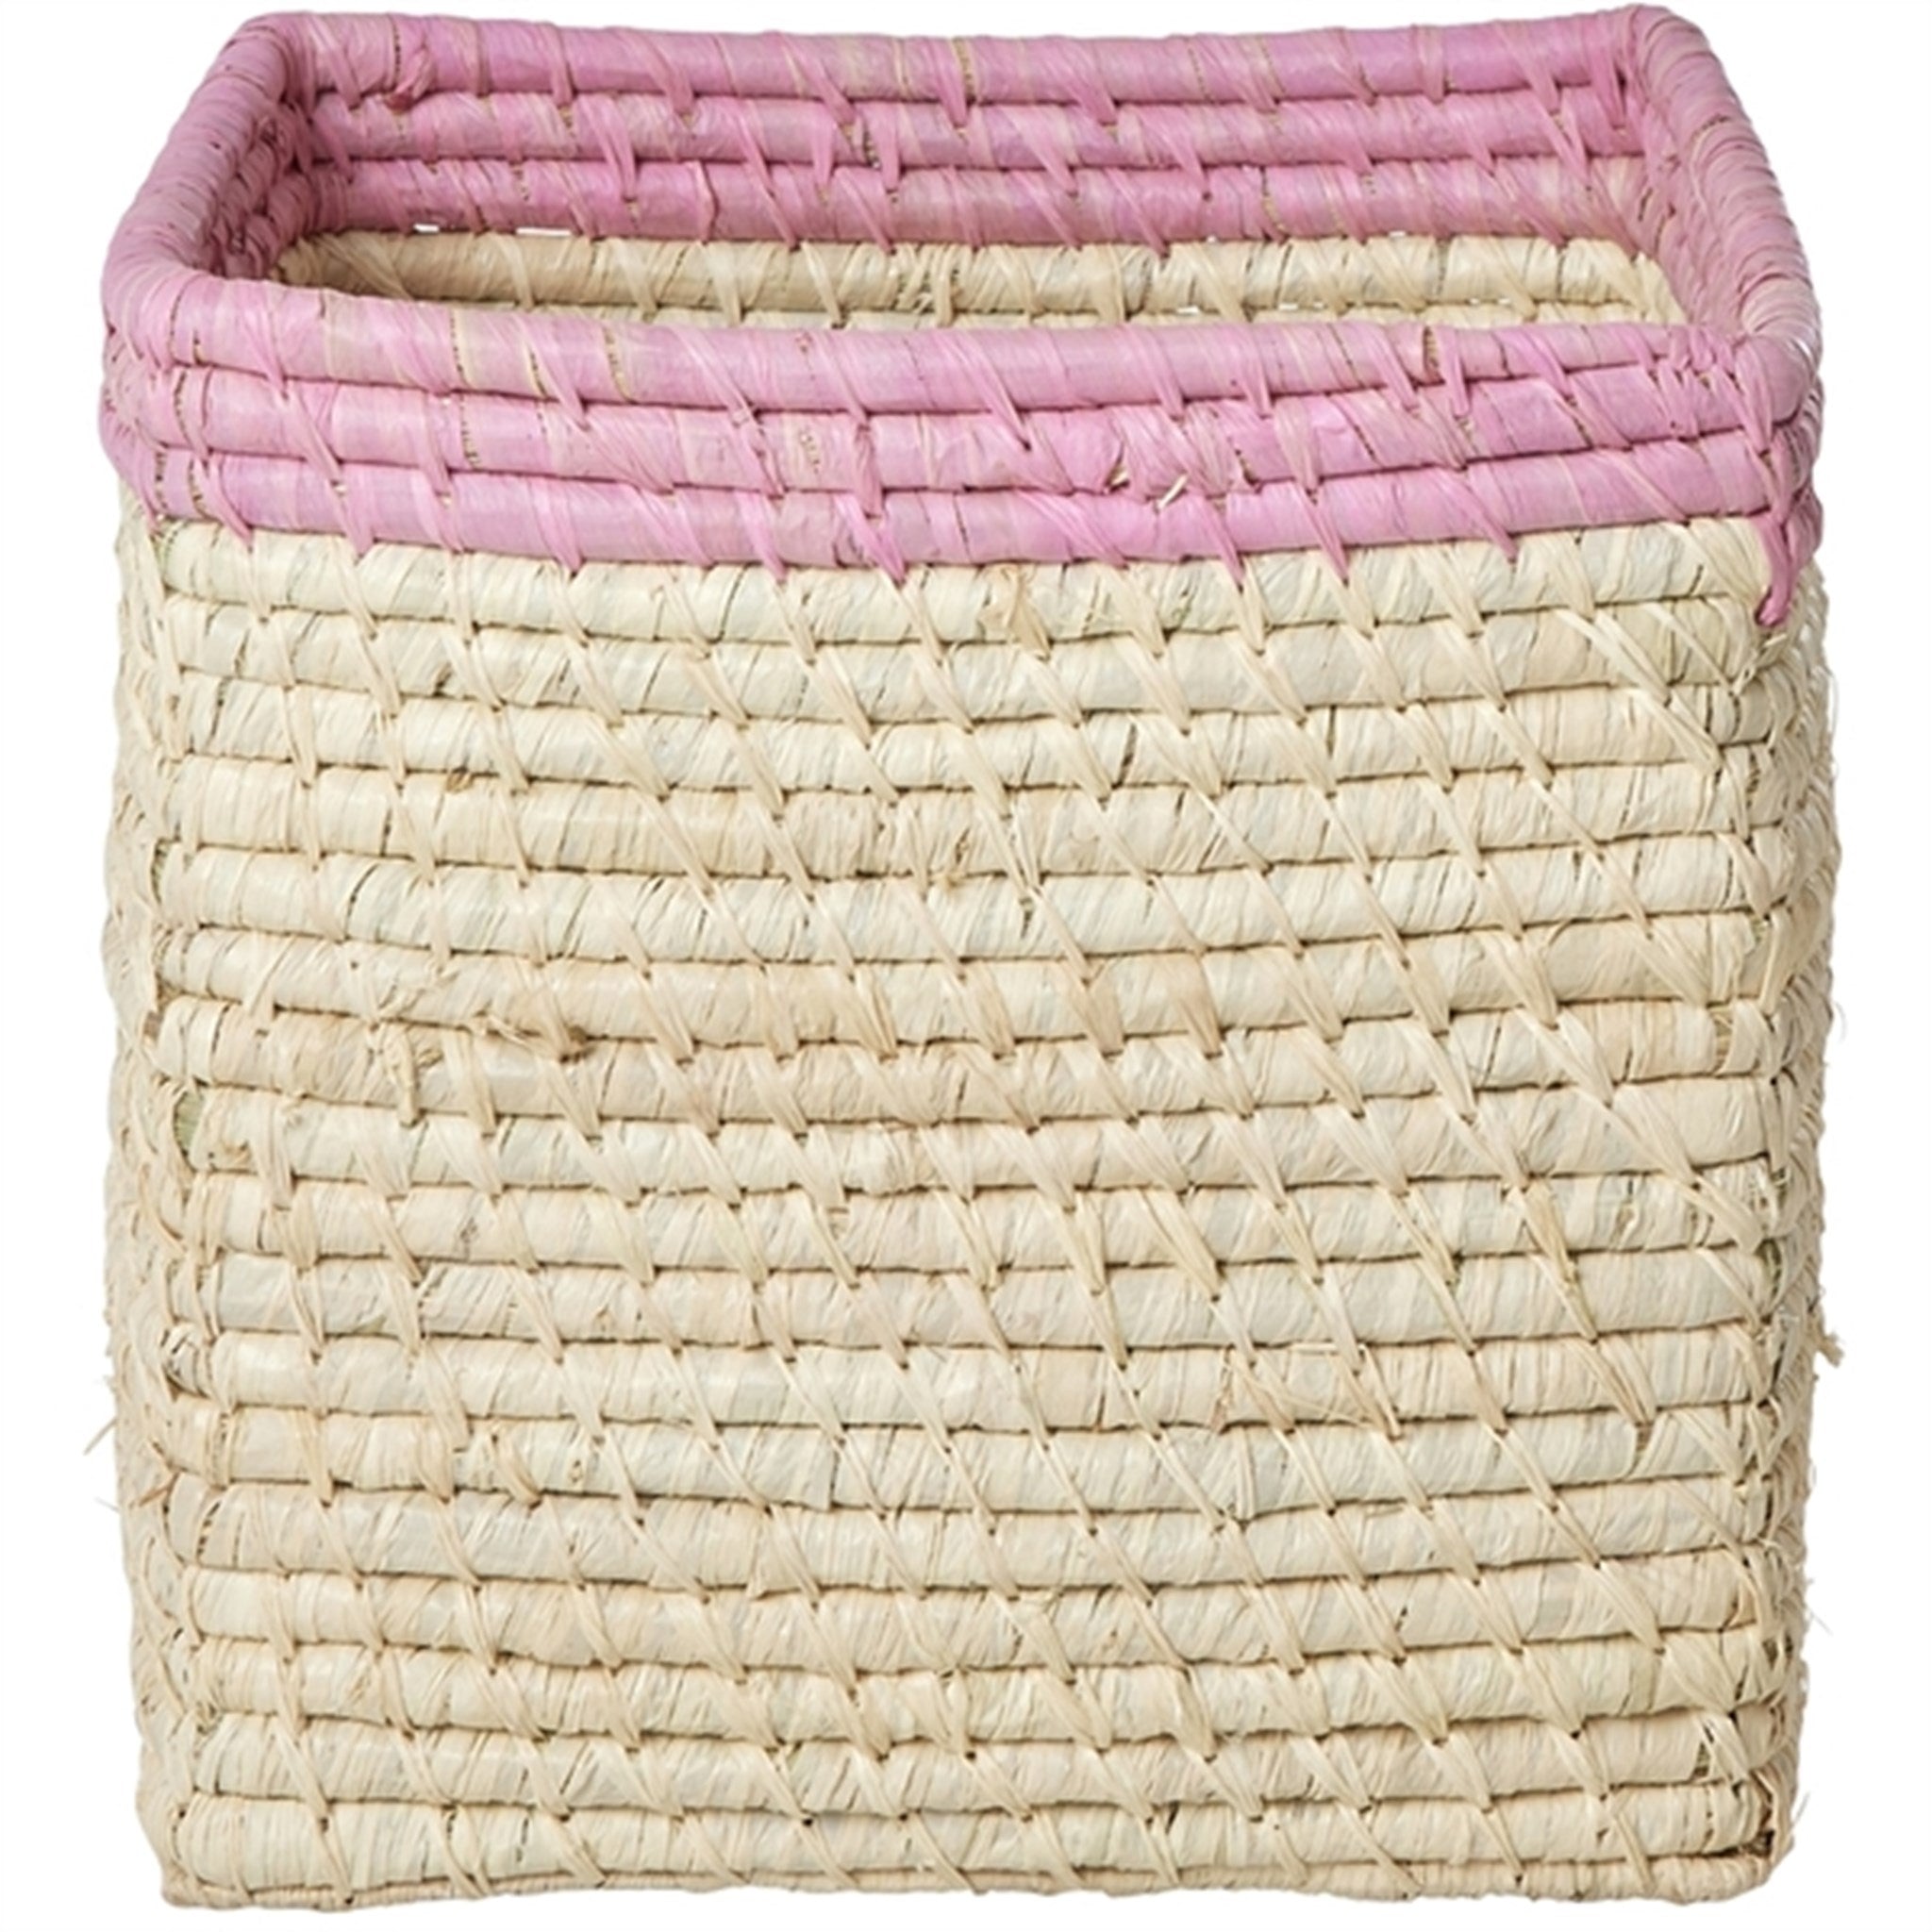 RICE Nature/Soft Pink Basket for Storage Small